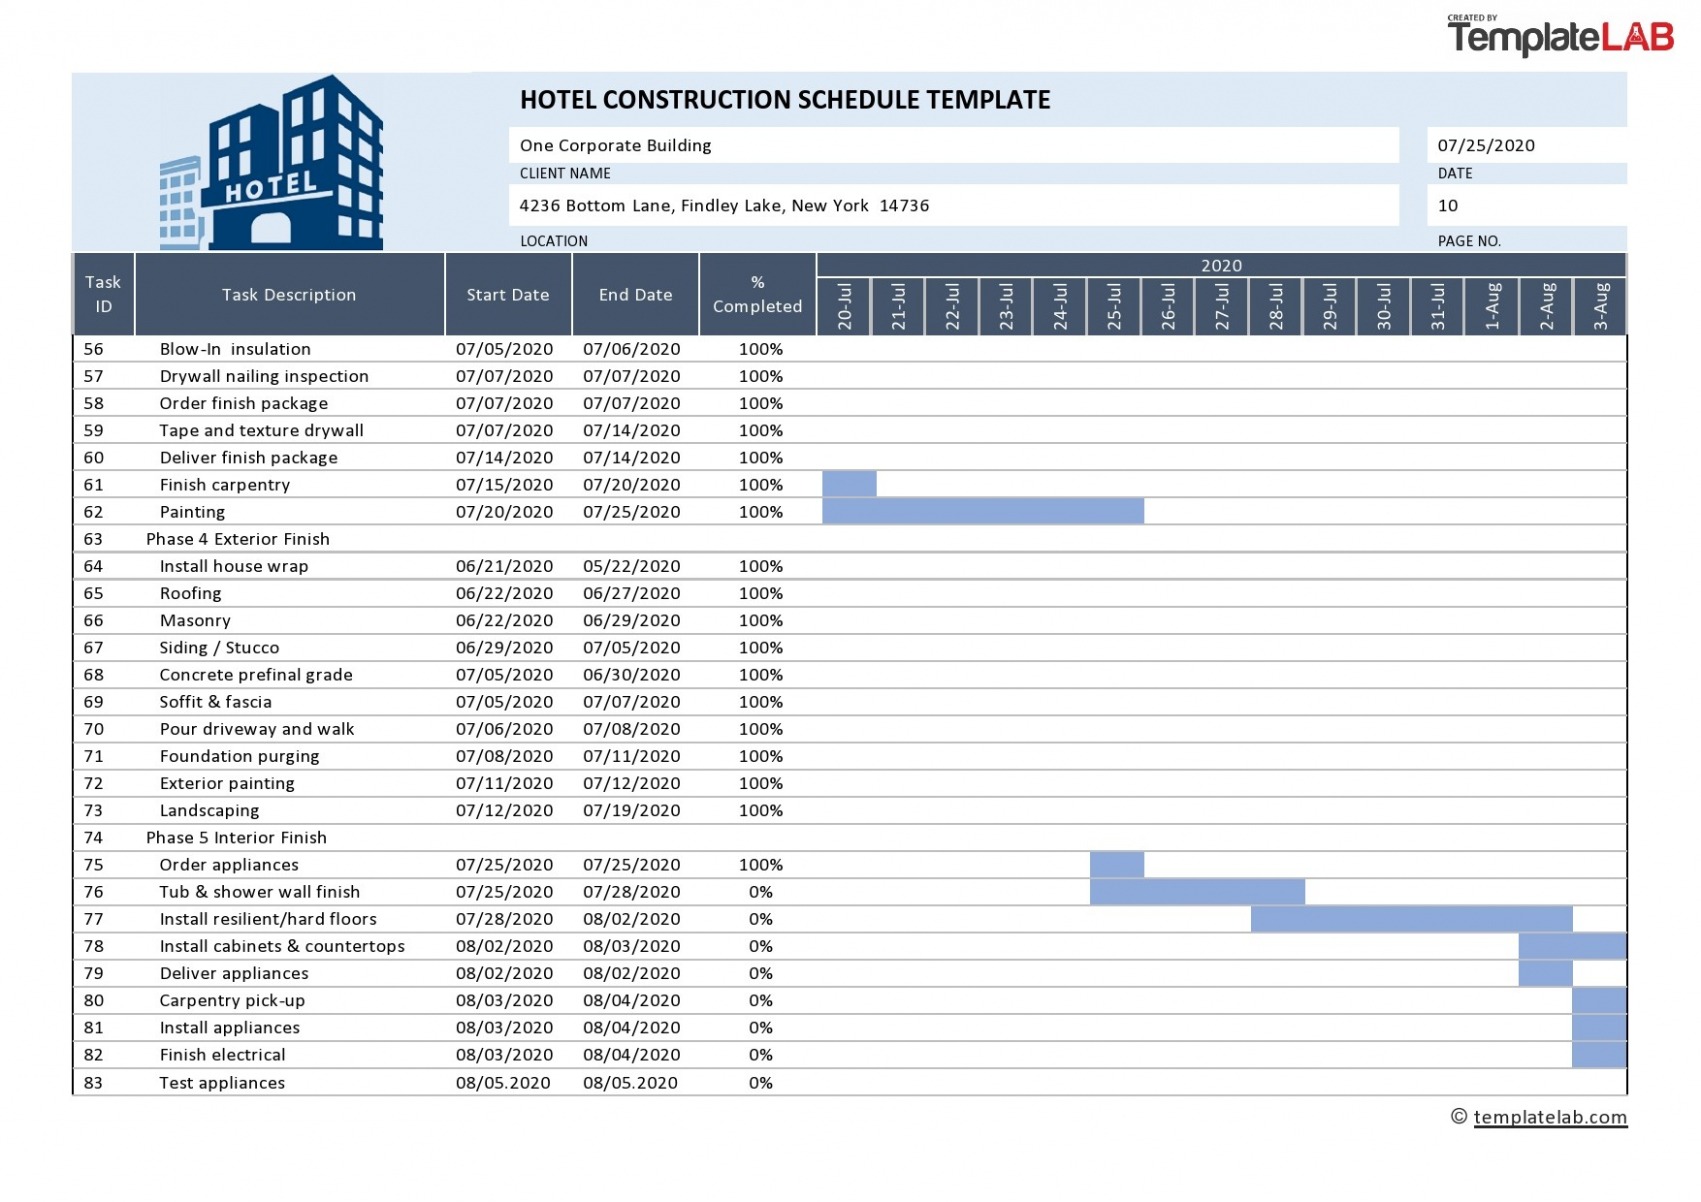  Hotel Construction Schedule Template Word